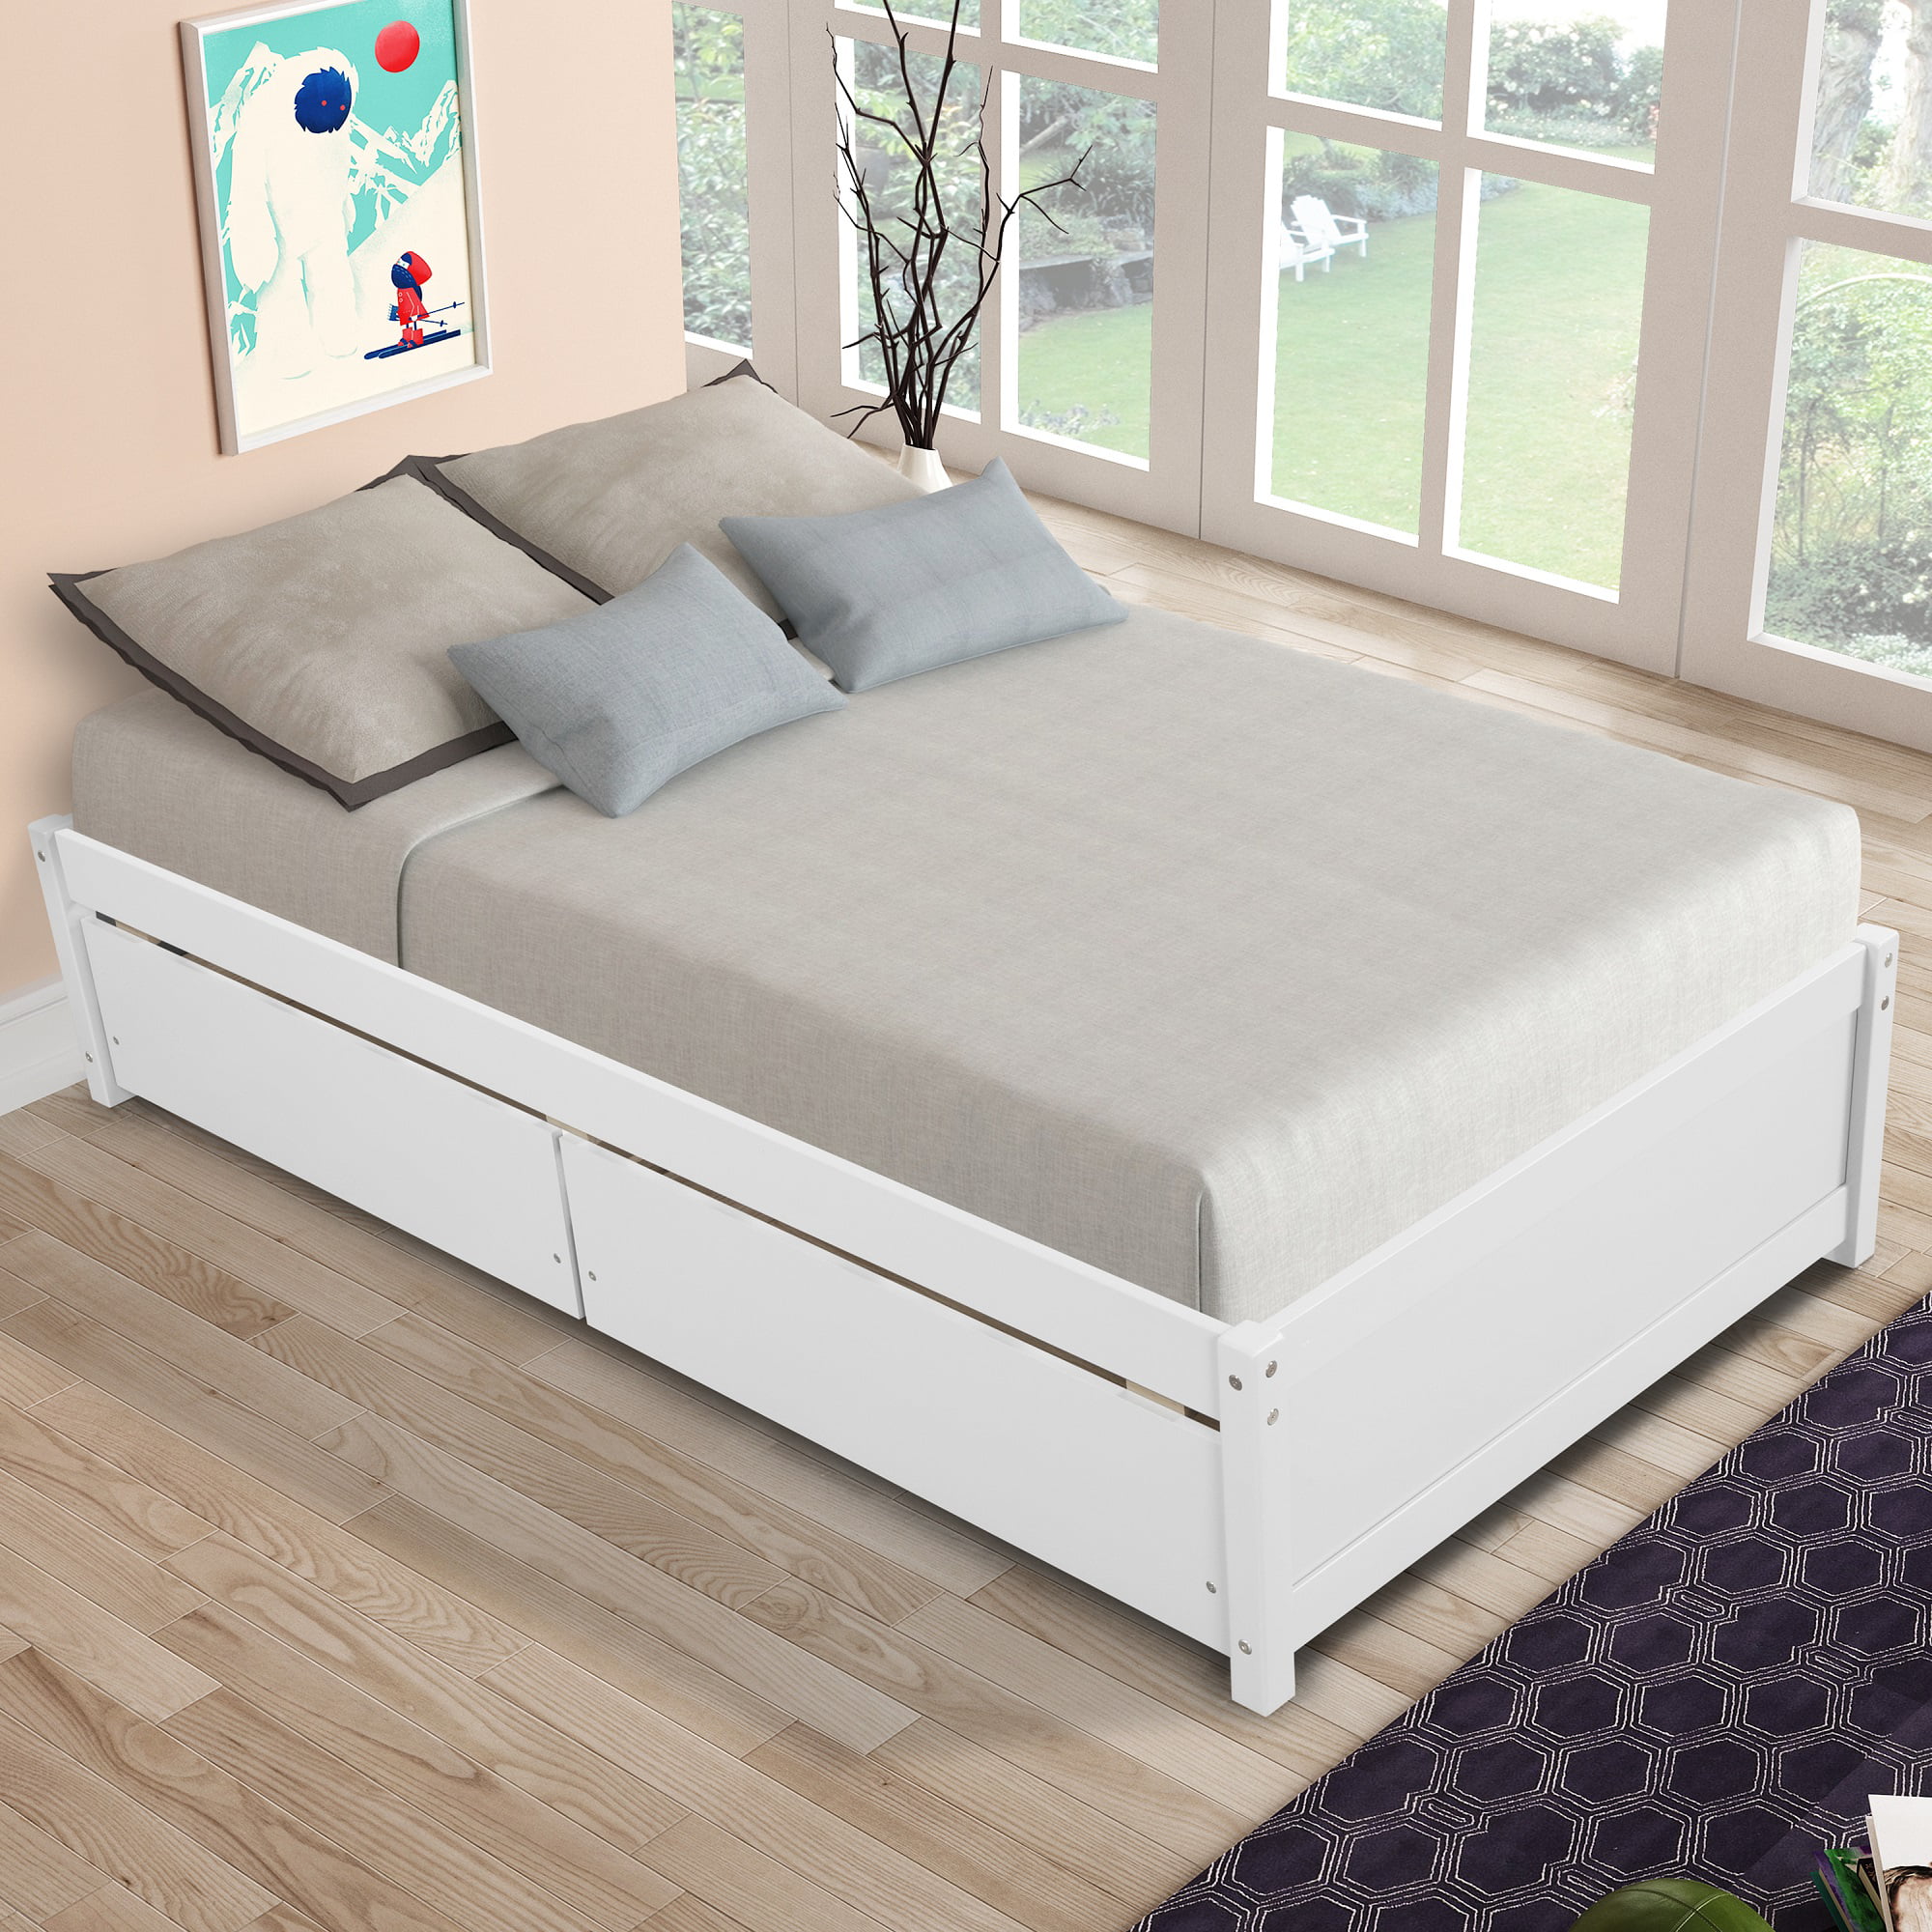 Daybed Bed Frame For Kids Teens S, White Bed Frame With Drawers